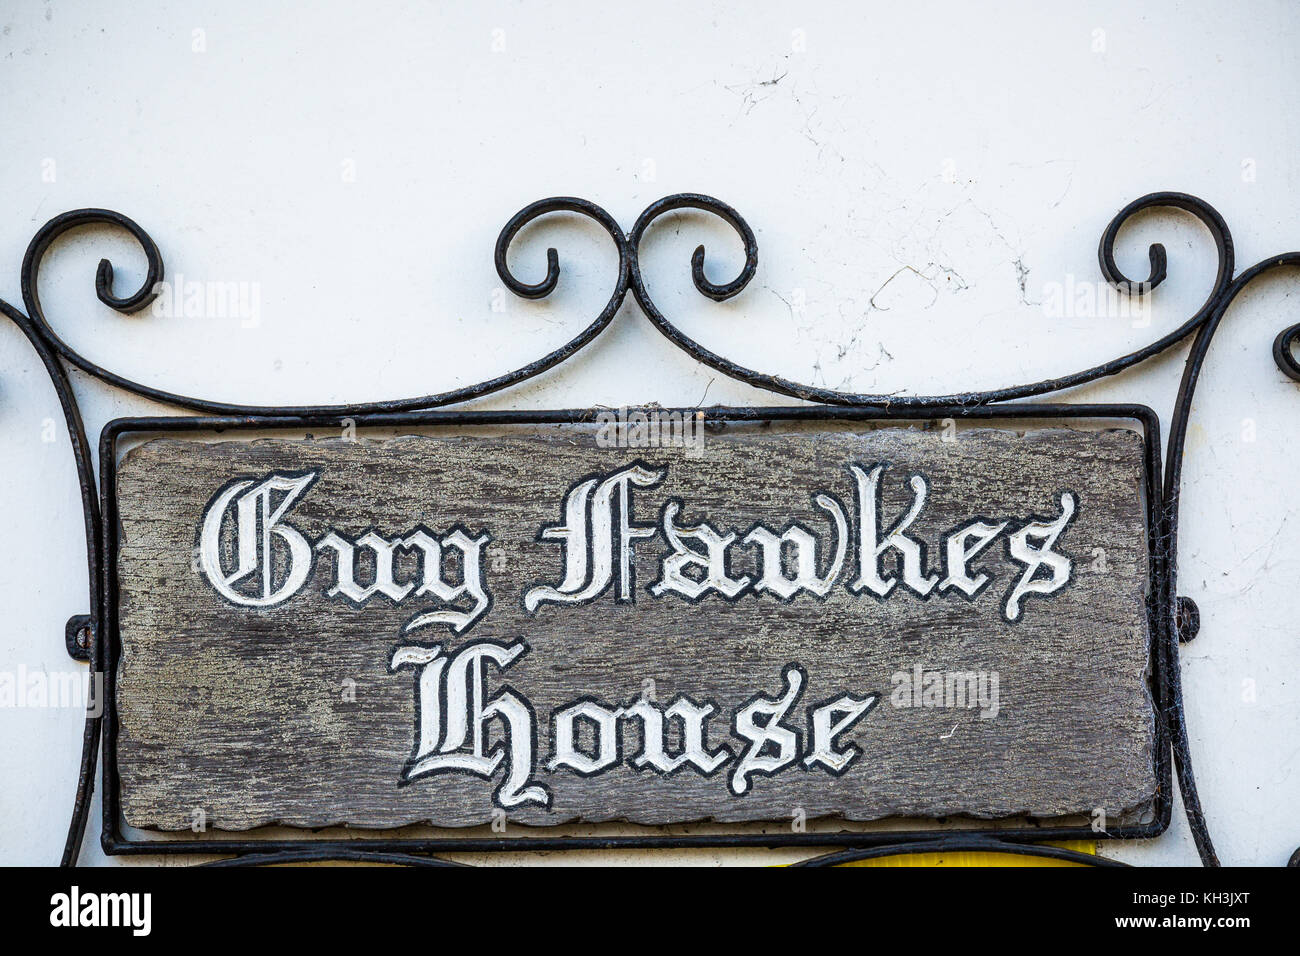 The Guy Fawkes House in Dunchurch,Warwickshire Stock Photo